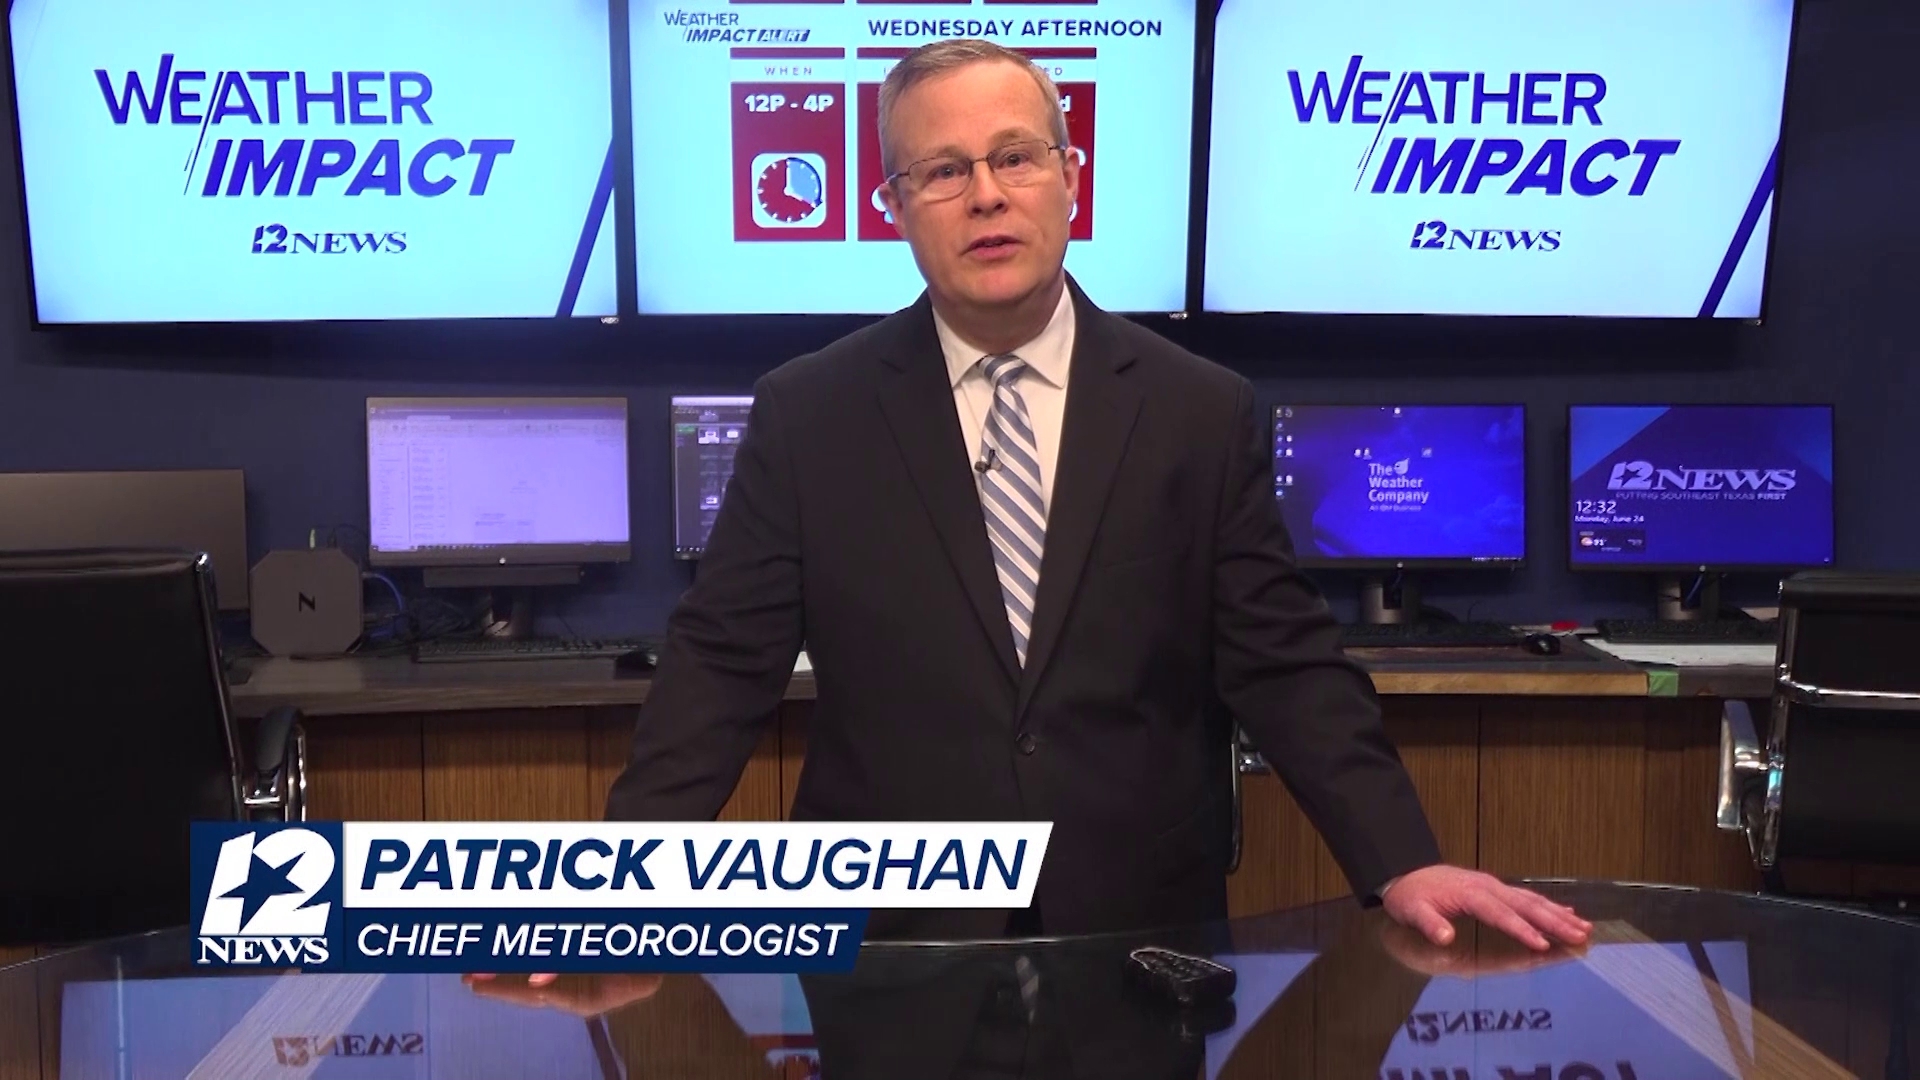 Stay aware of the weather that impacts you with the 12News Weather Impact Team